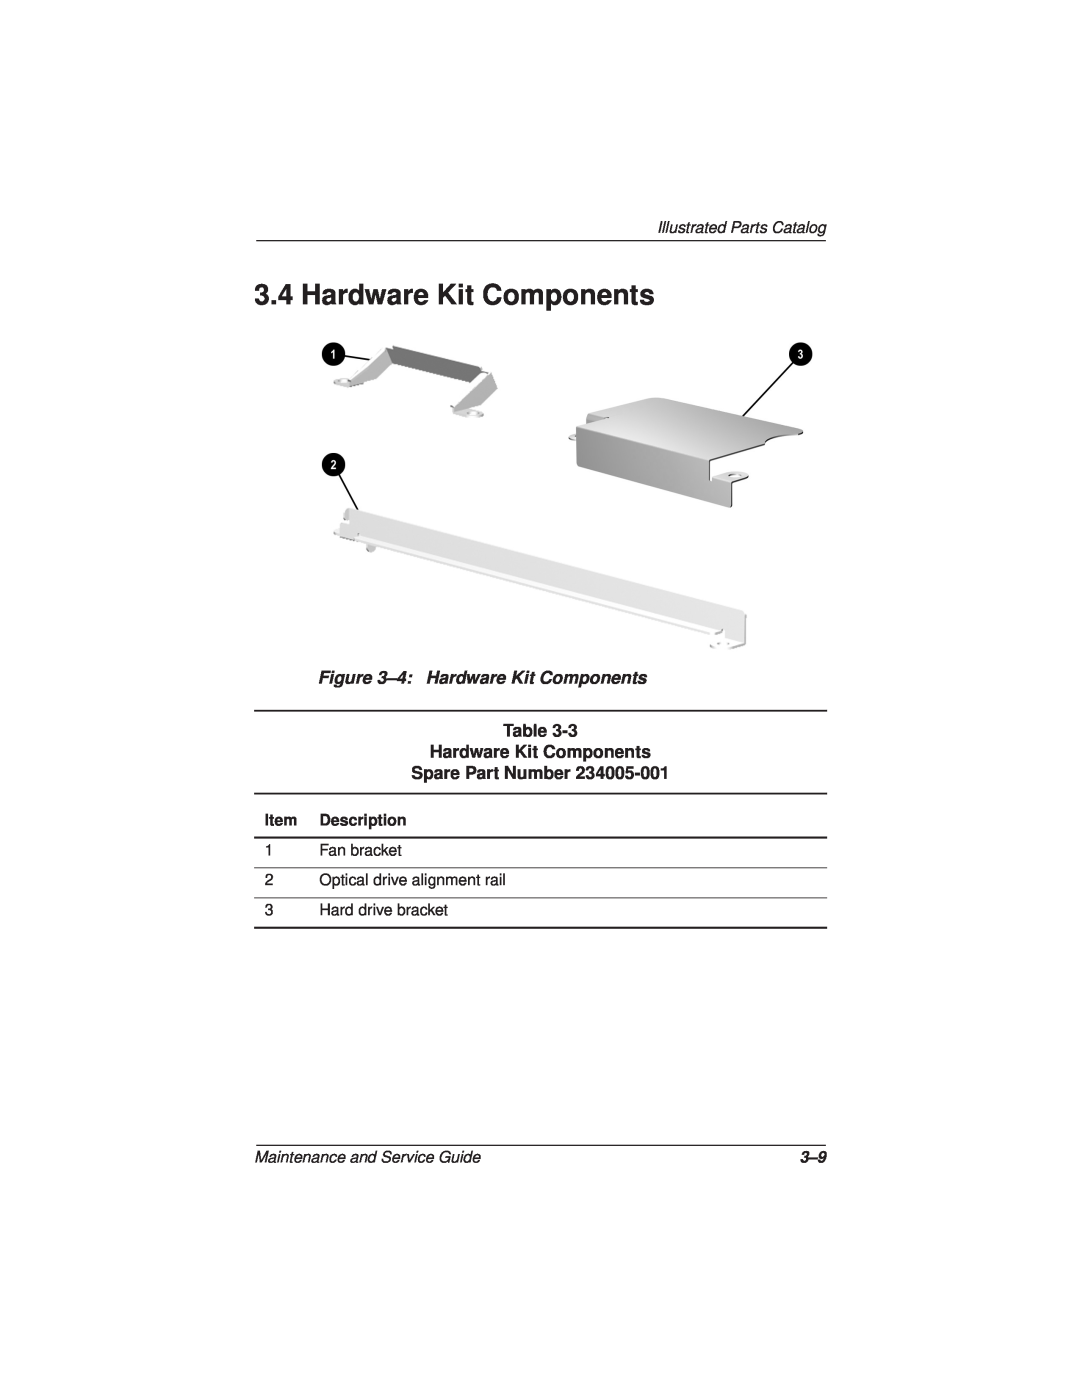 Compaq N110 manual 4 Hardware Kit Components, Hardware Kit Components Spare Part Number, Illustrated Parts Catalog 